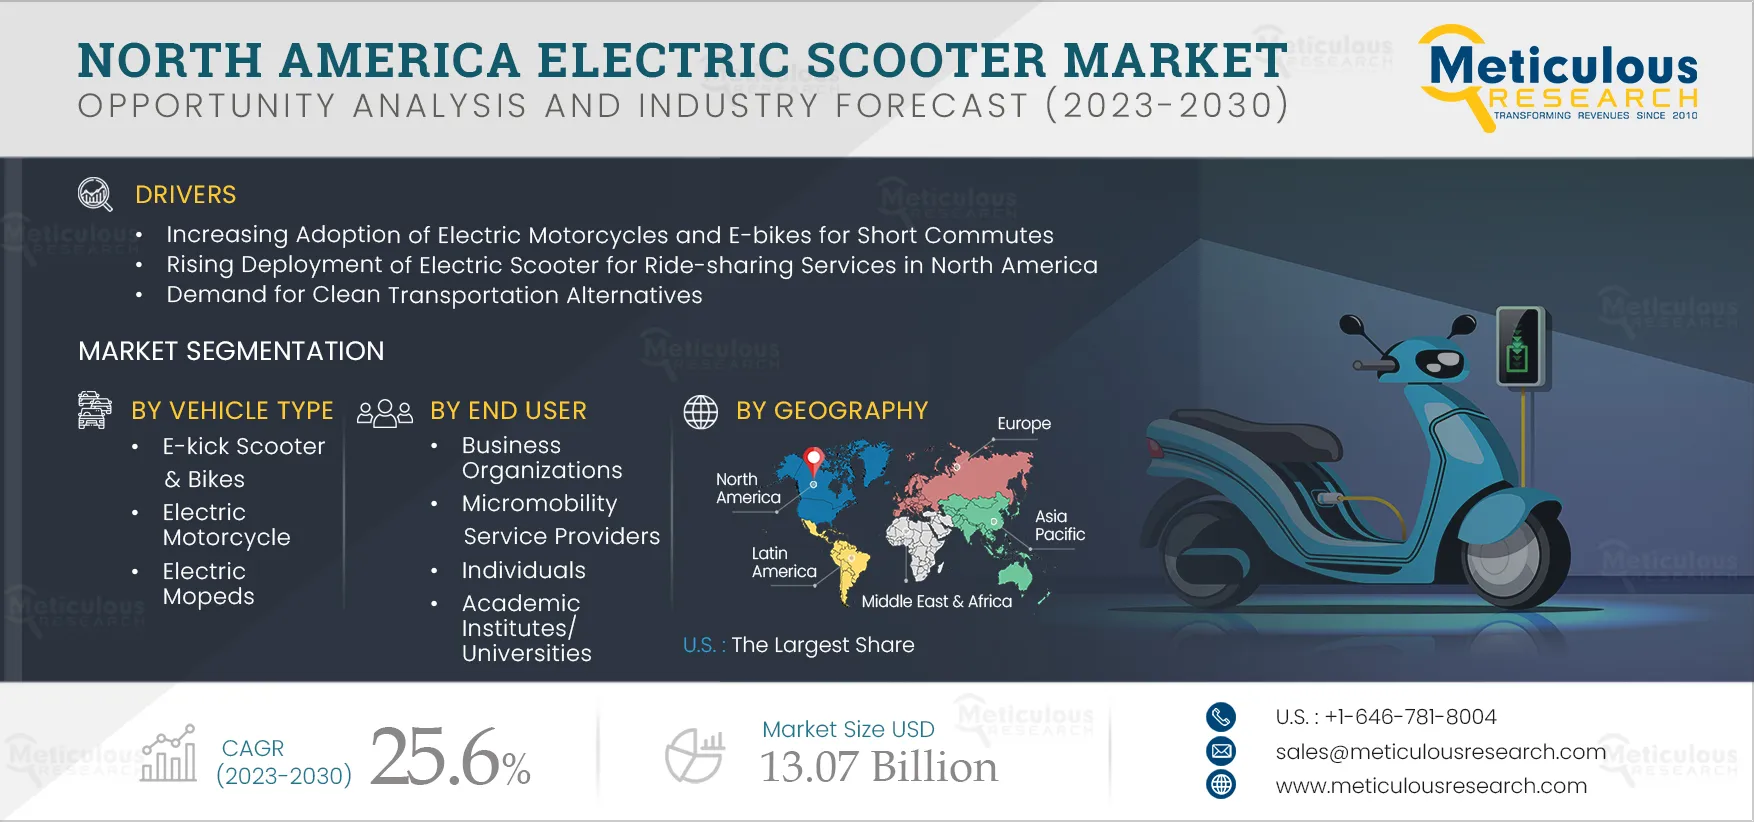 North America Electric Scooter Market